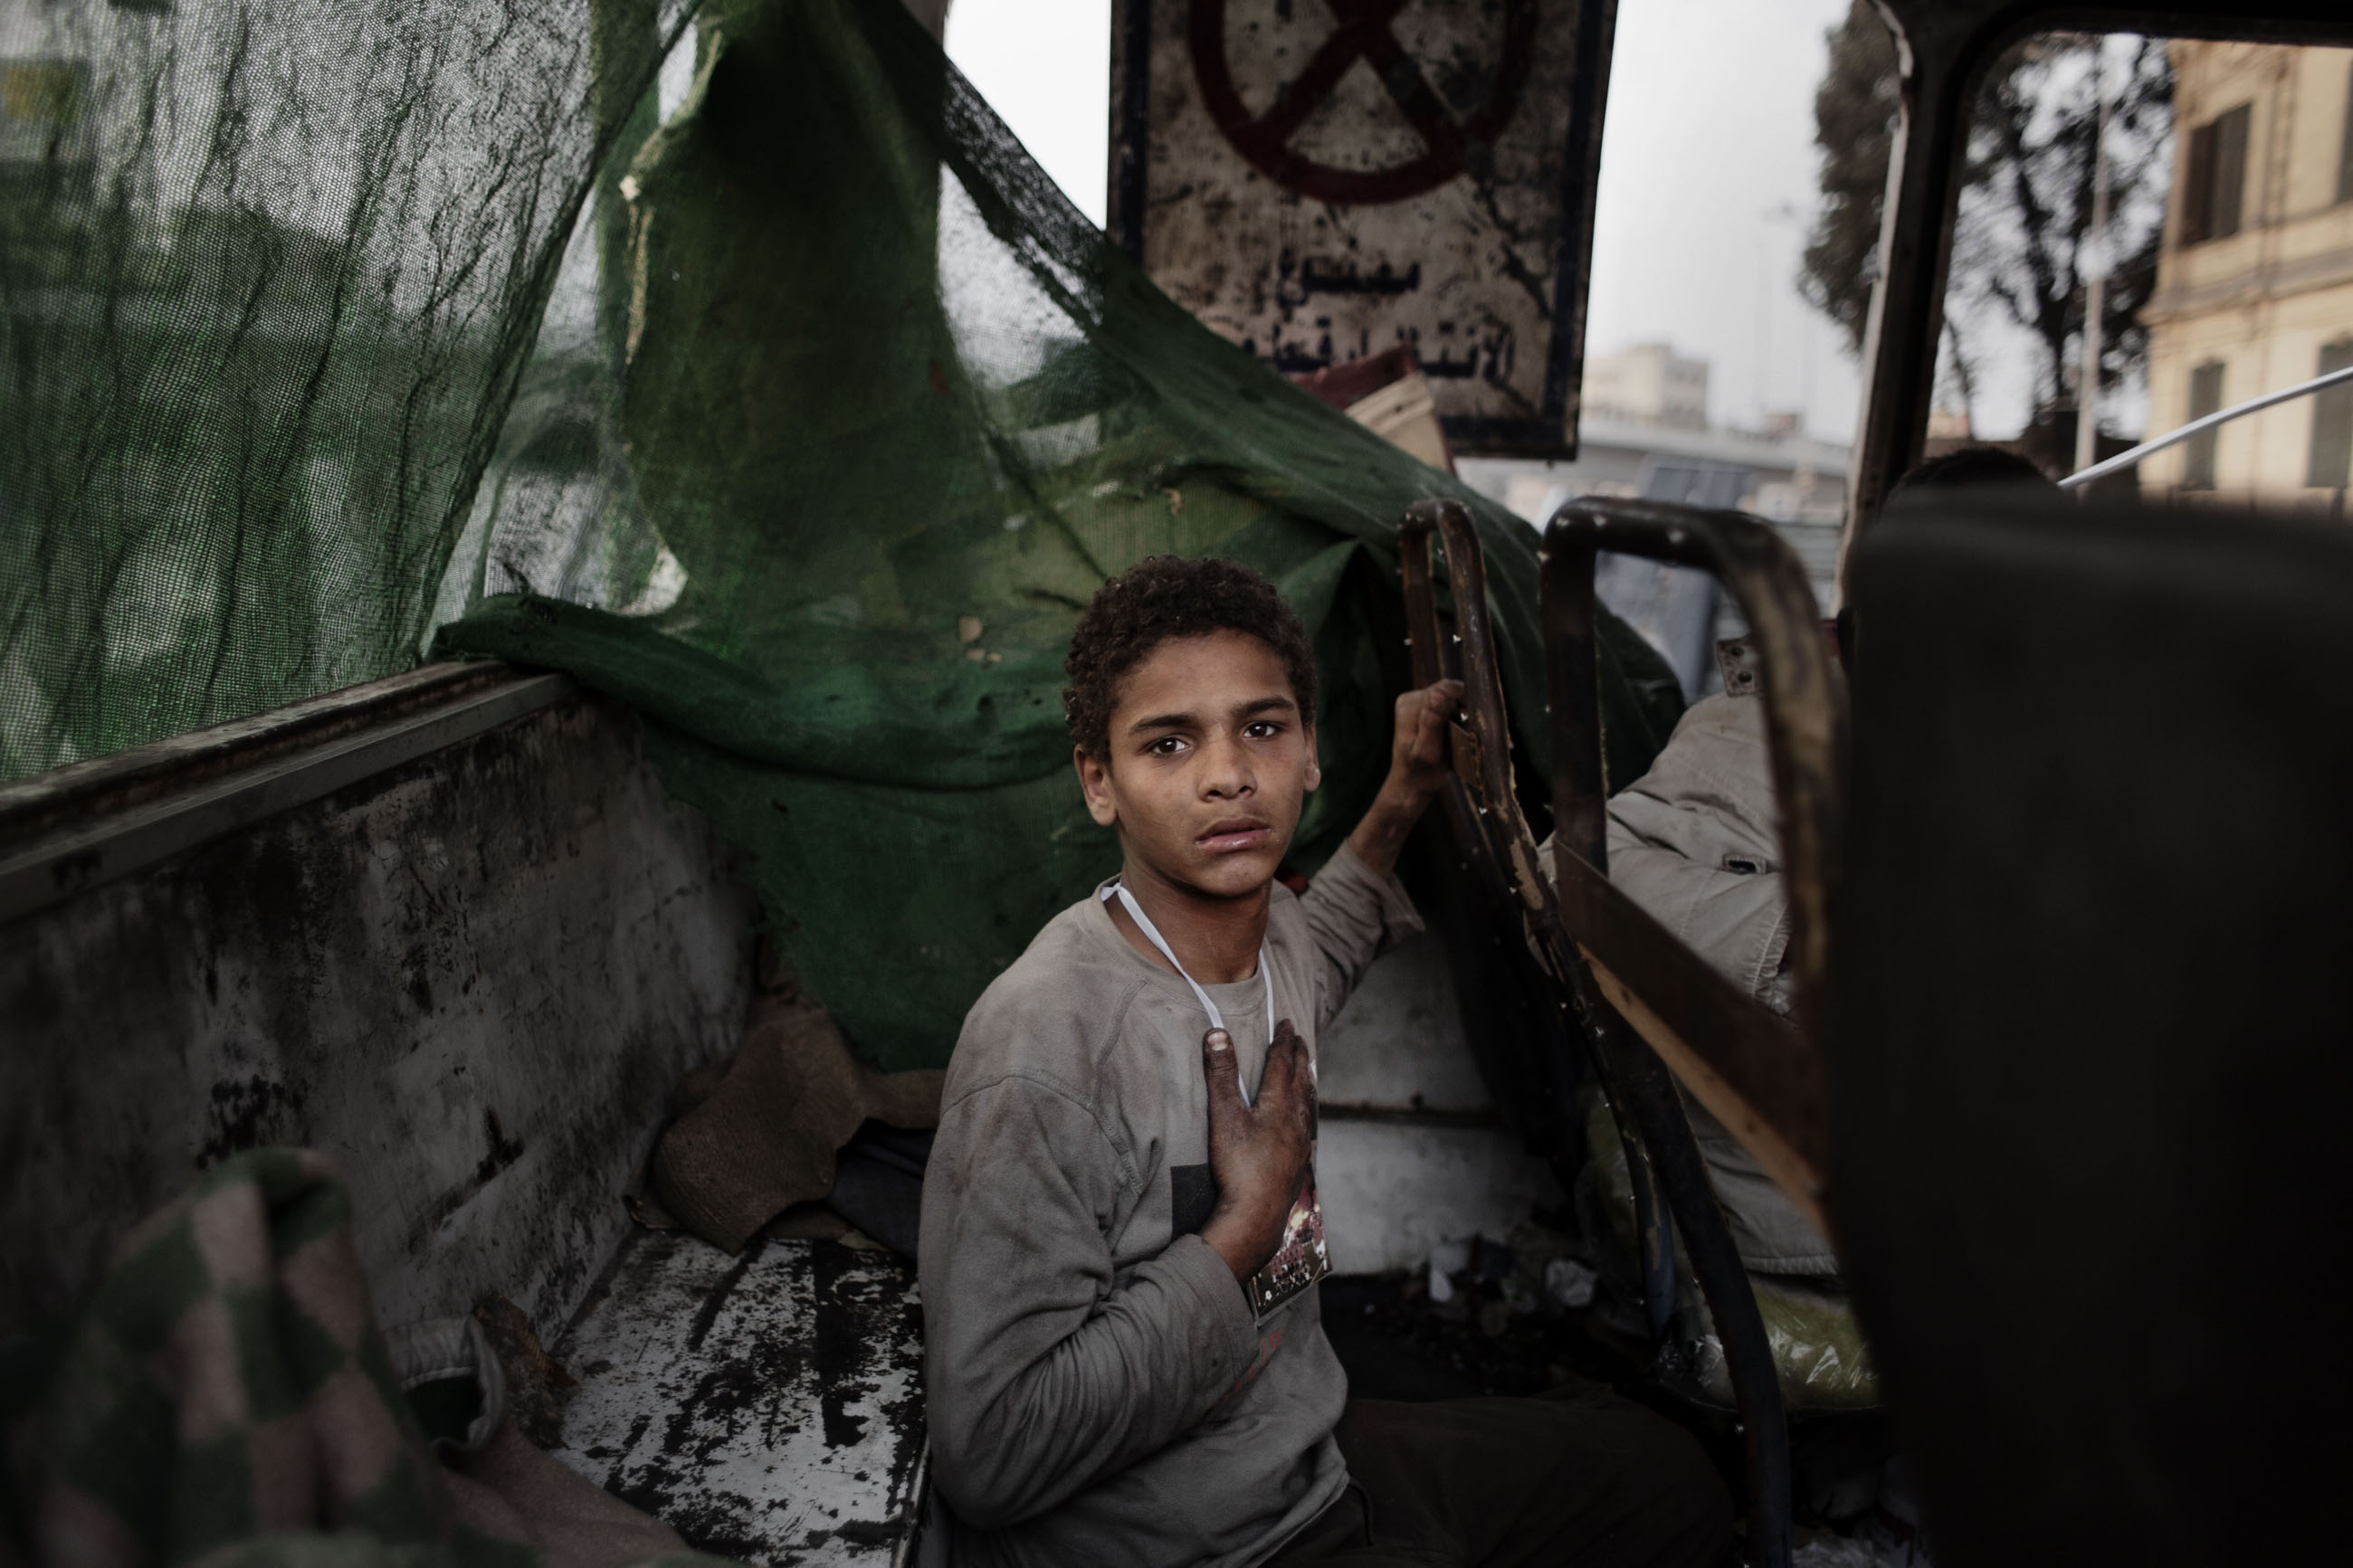 A young Egyptian protestor inside the shell of a burned out bus used as a barricade at the entrance to Tahrir Square, Cairo, Feb. 7, 2011.